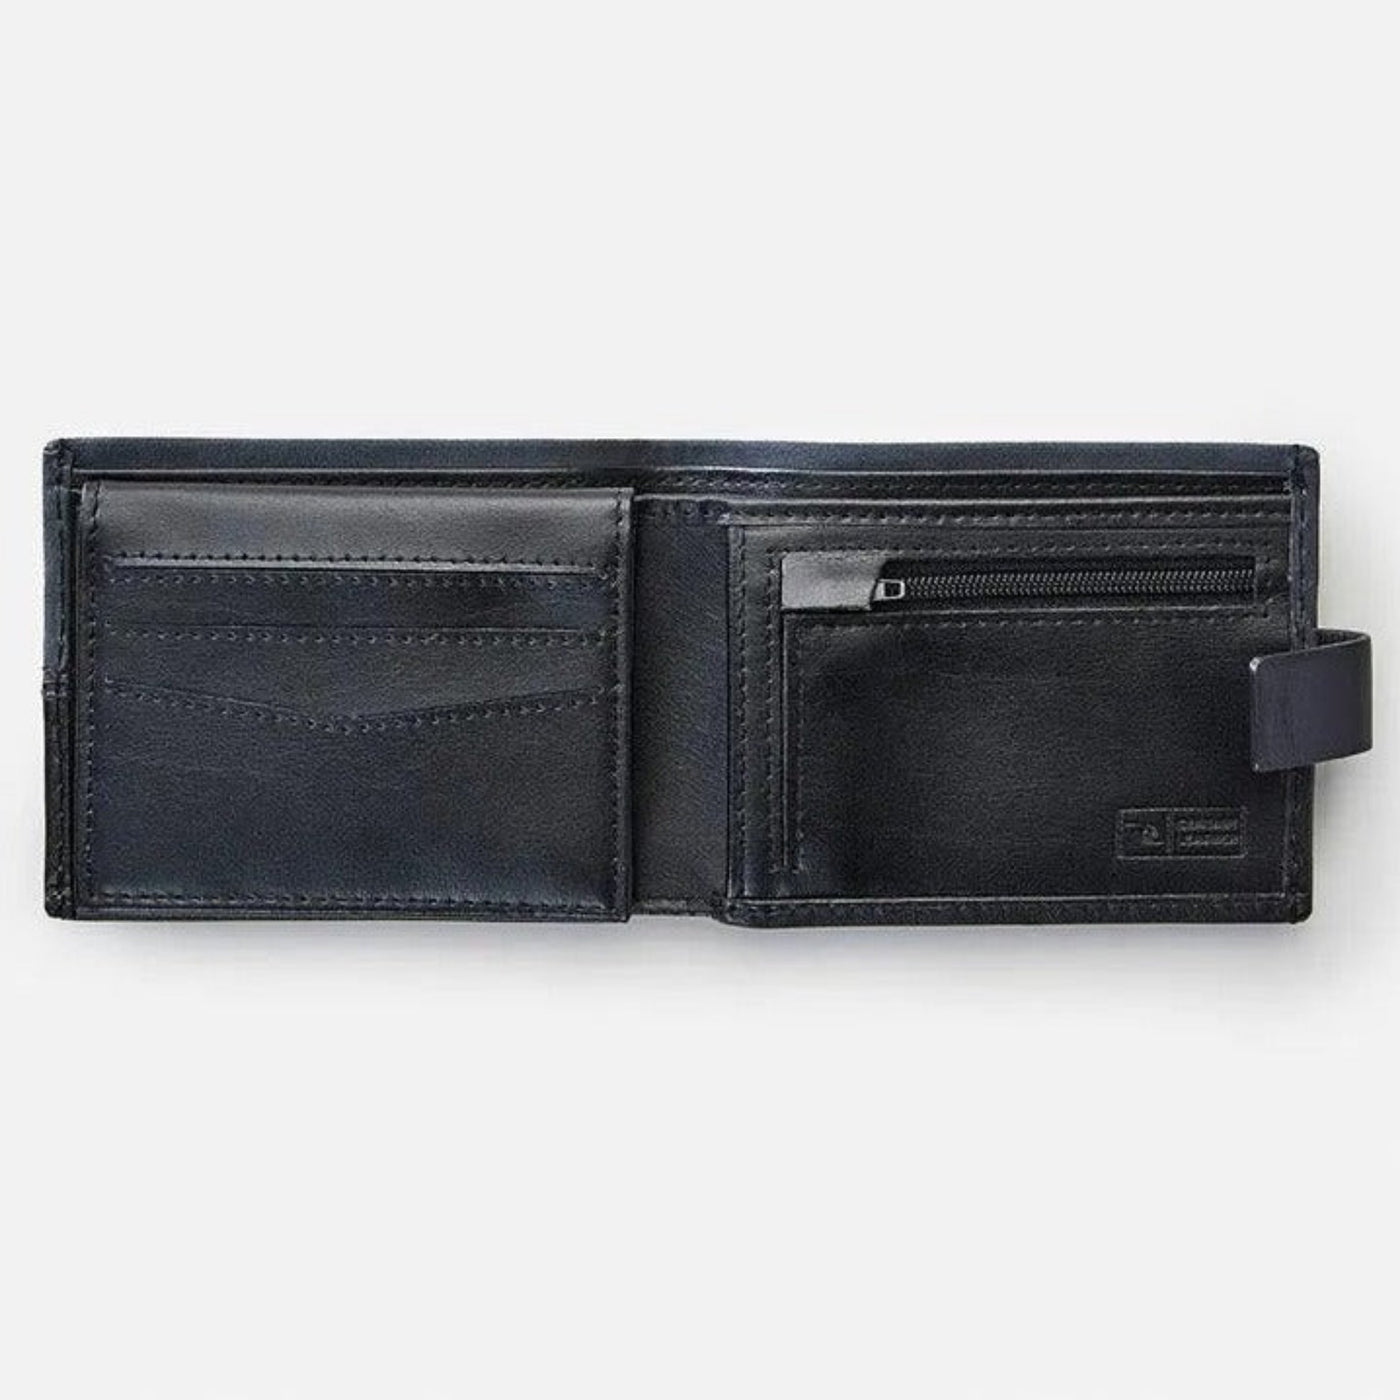 Rip Curl Pumped Clip RFID All Day Wallet